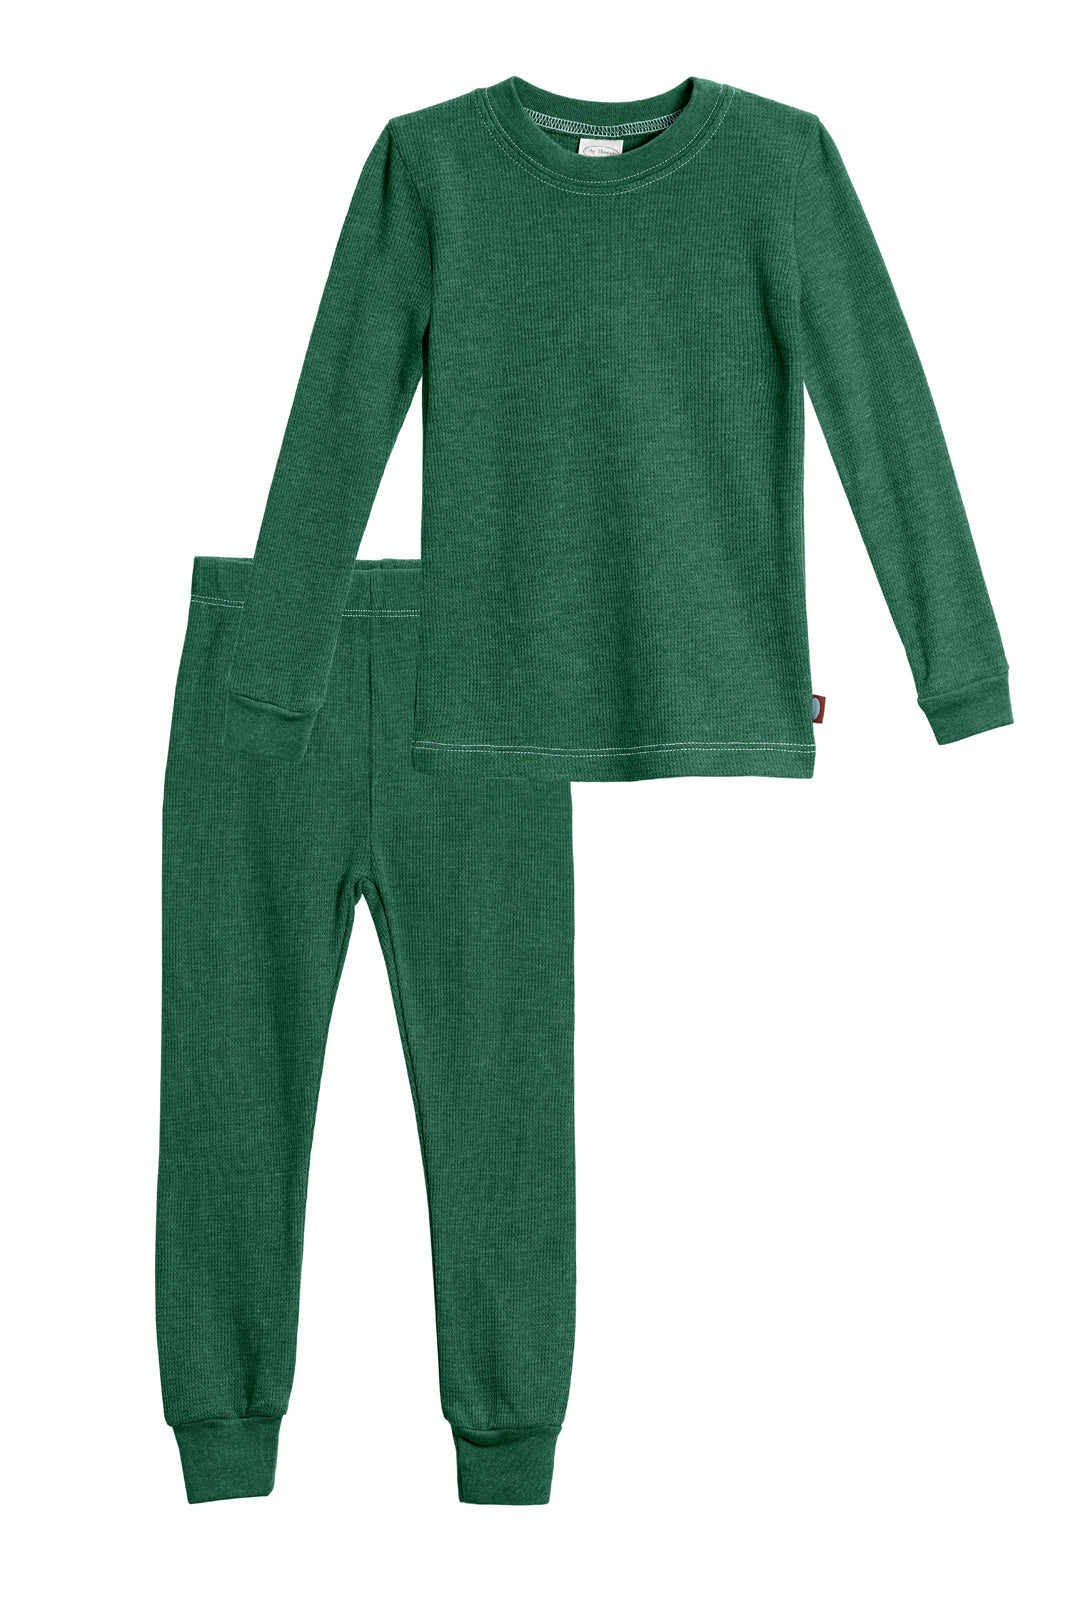 Boys Soft & Cozy Thermal 2-Piece Long Johns | Forest Green w- Baby Blue  Stitch